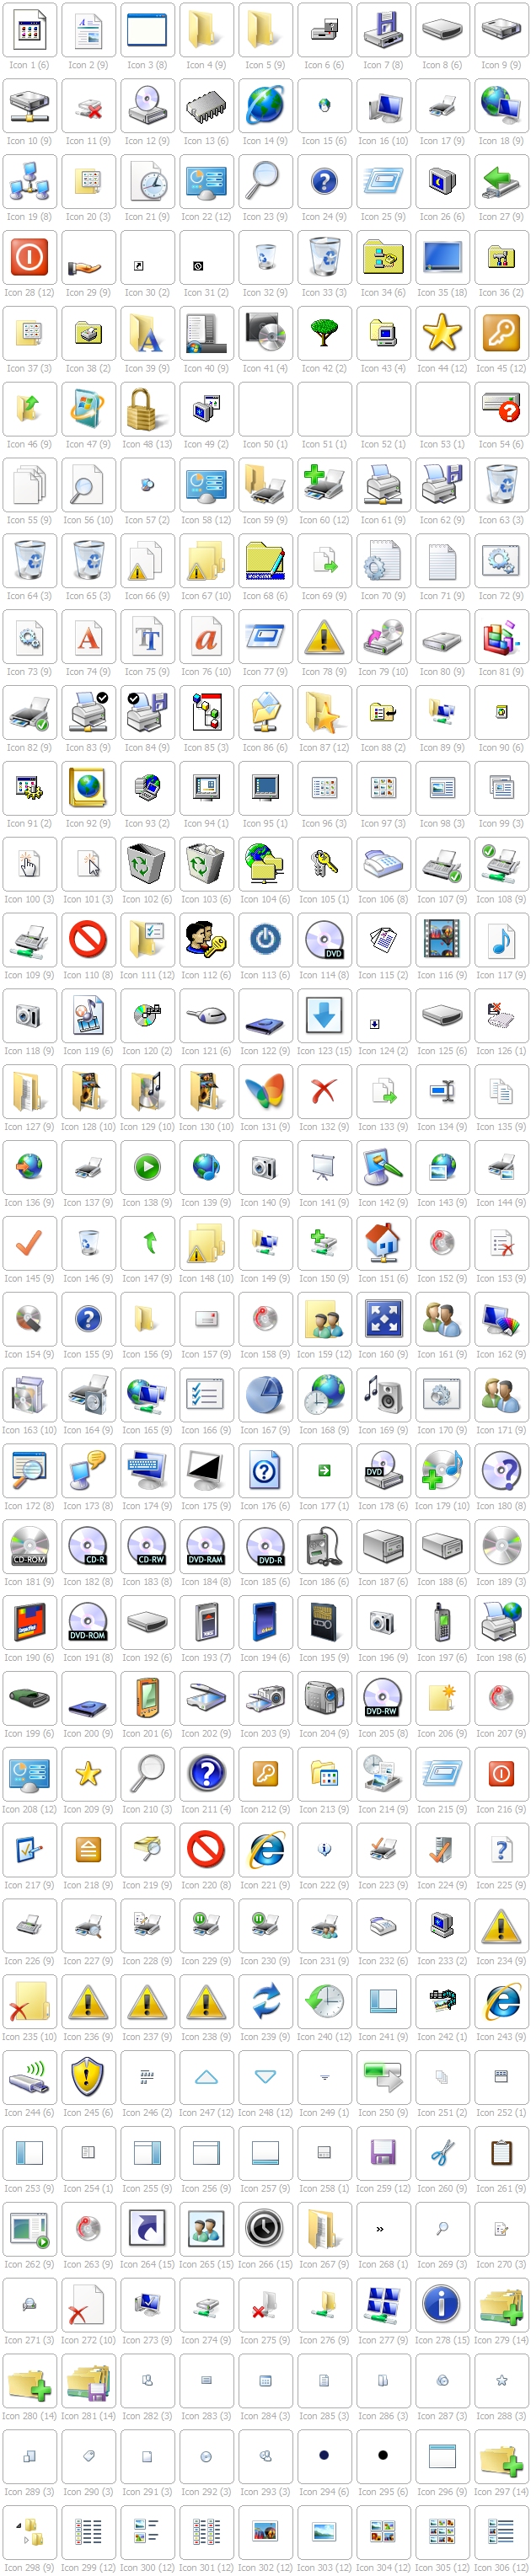 shell32.dll icons